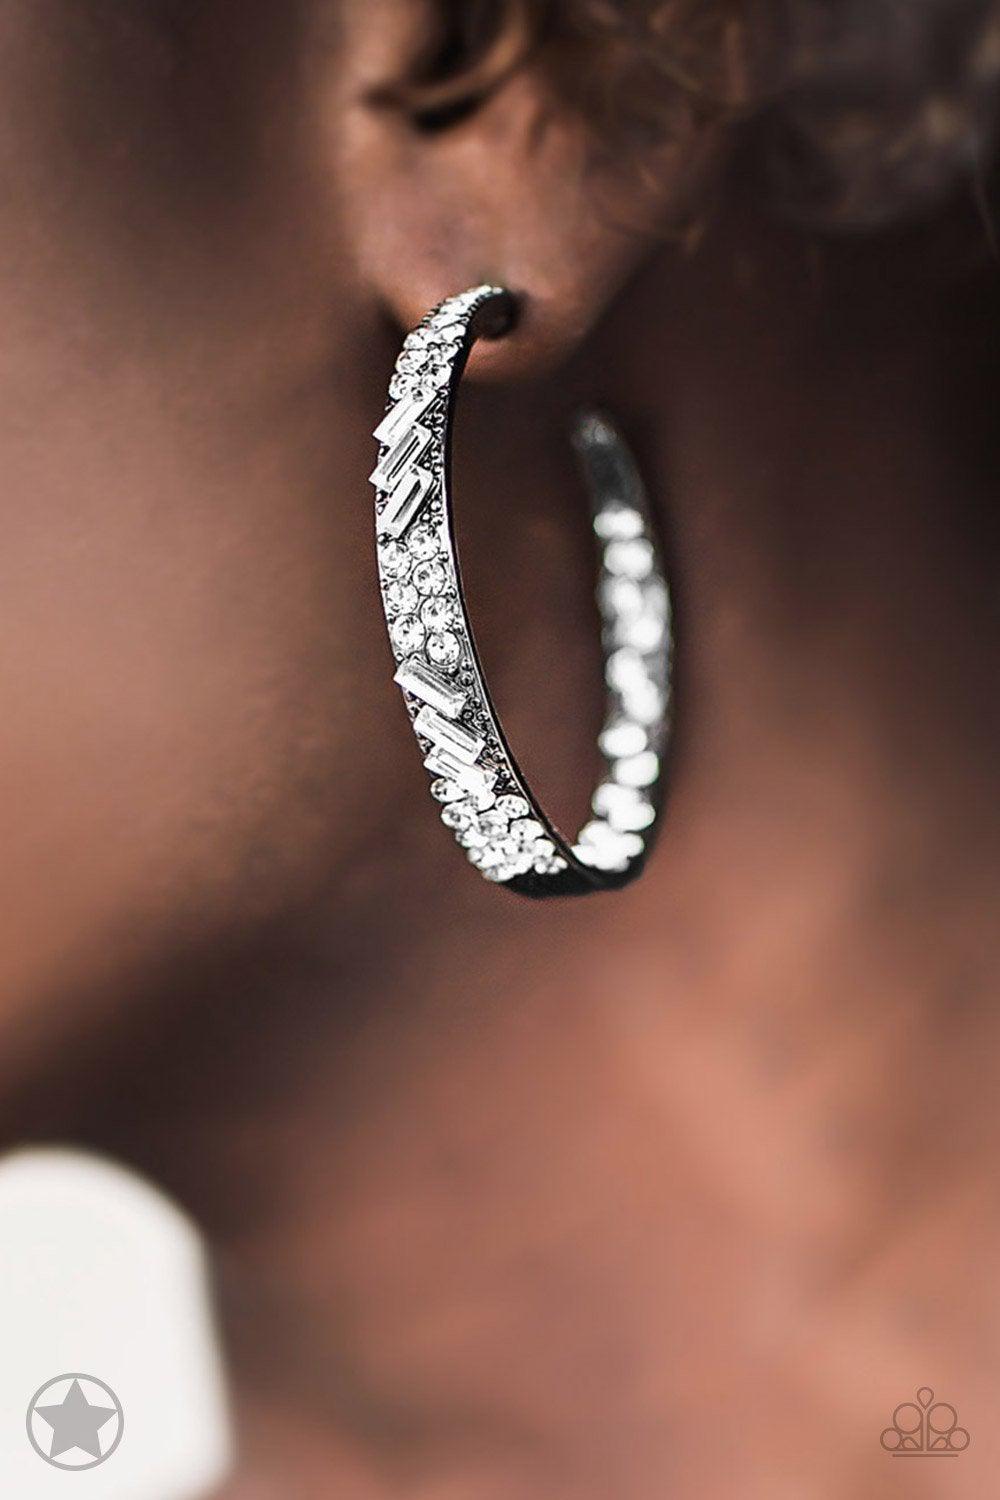 Glitzy By Association Gunmetal and White Rhinestone Earrings - Paparazzi Accessories - Blockbuster - best seller - CarasShop.com - $5 Jewelry by Cara Jewels